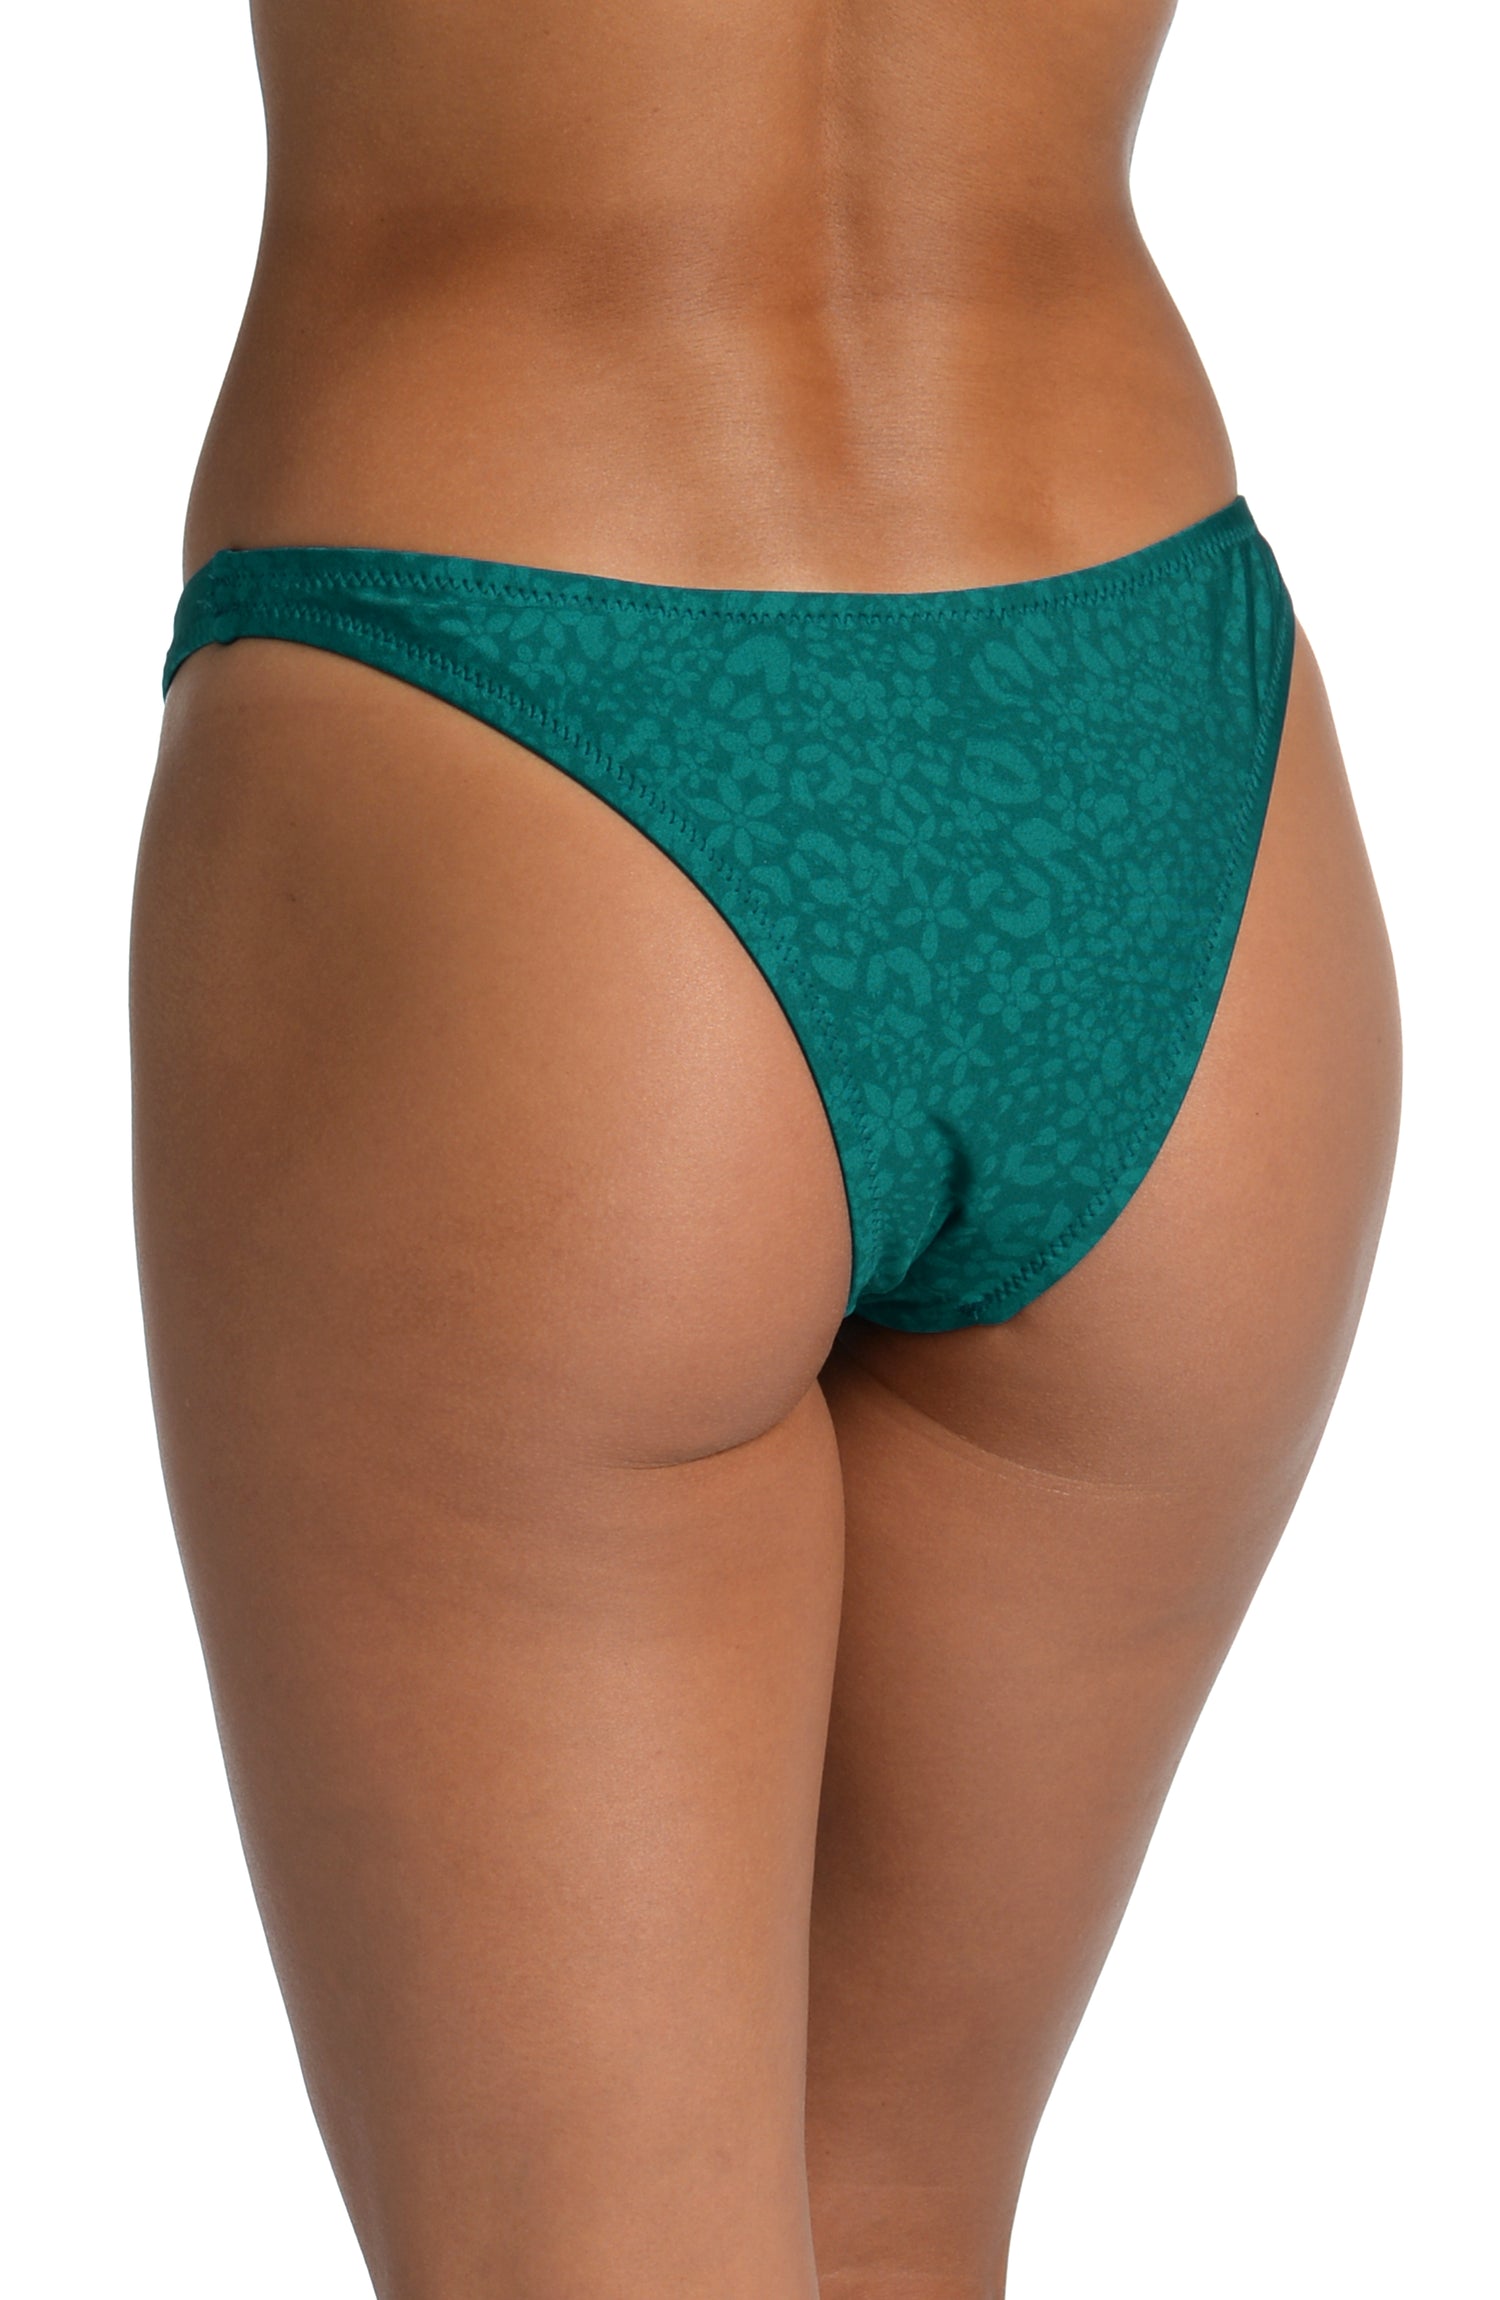 Model is wearing a jade colored spot printed cheeky hipster bottom from our Ditsy Spot collection!